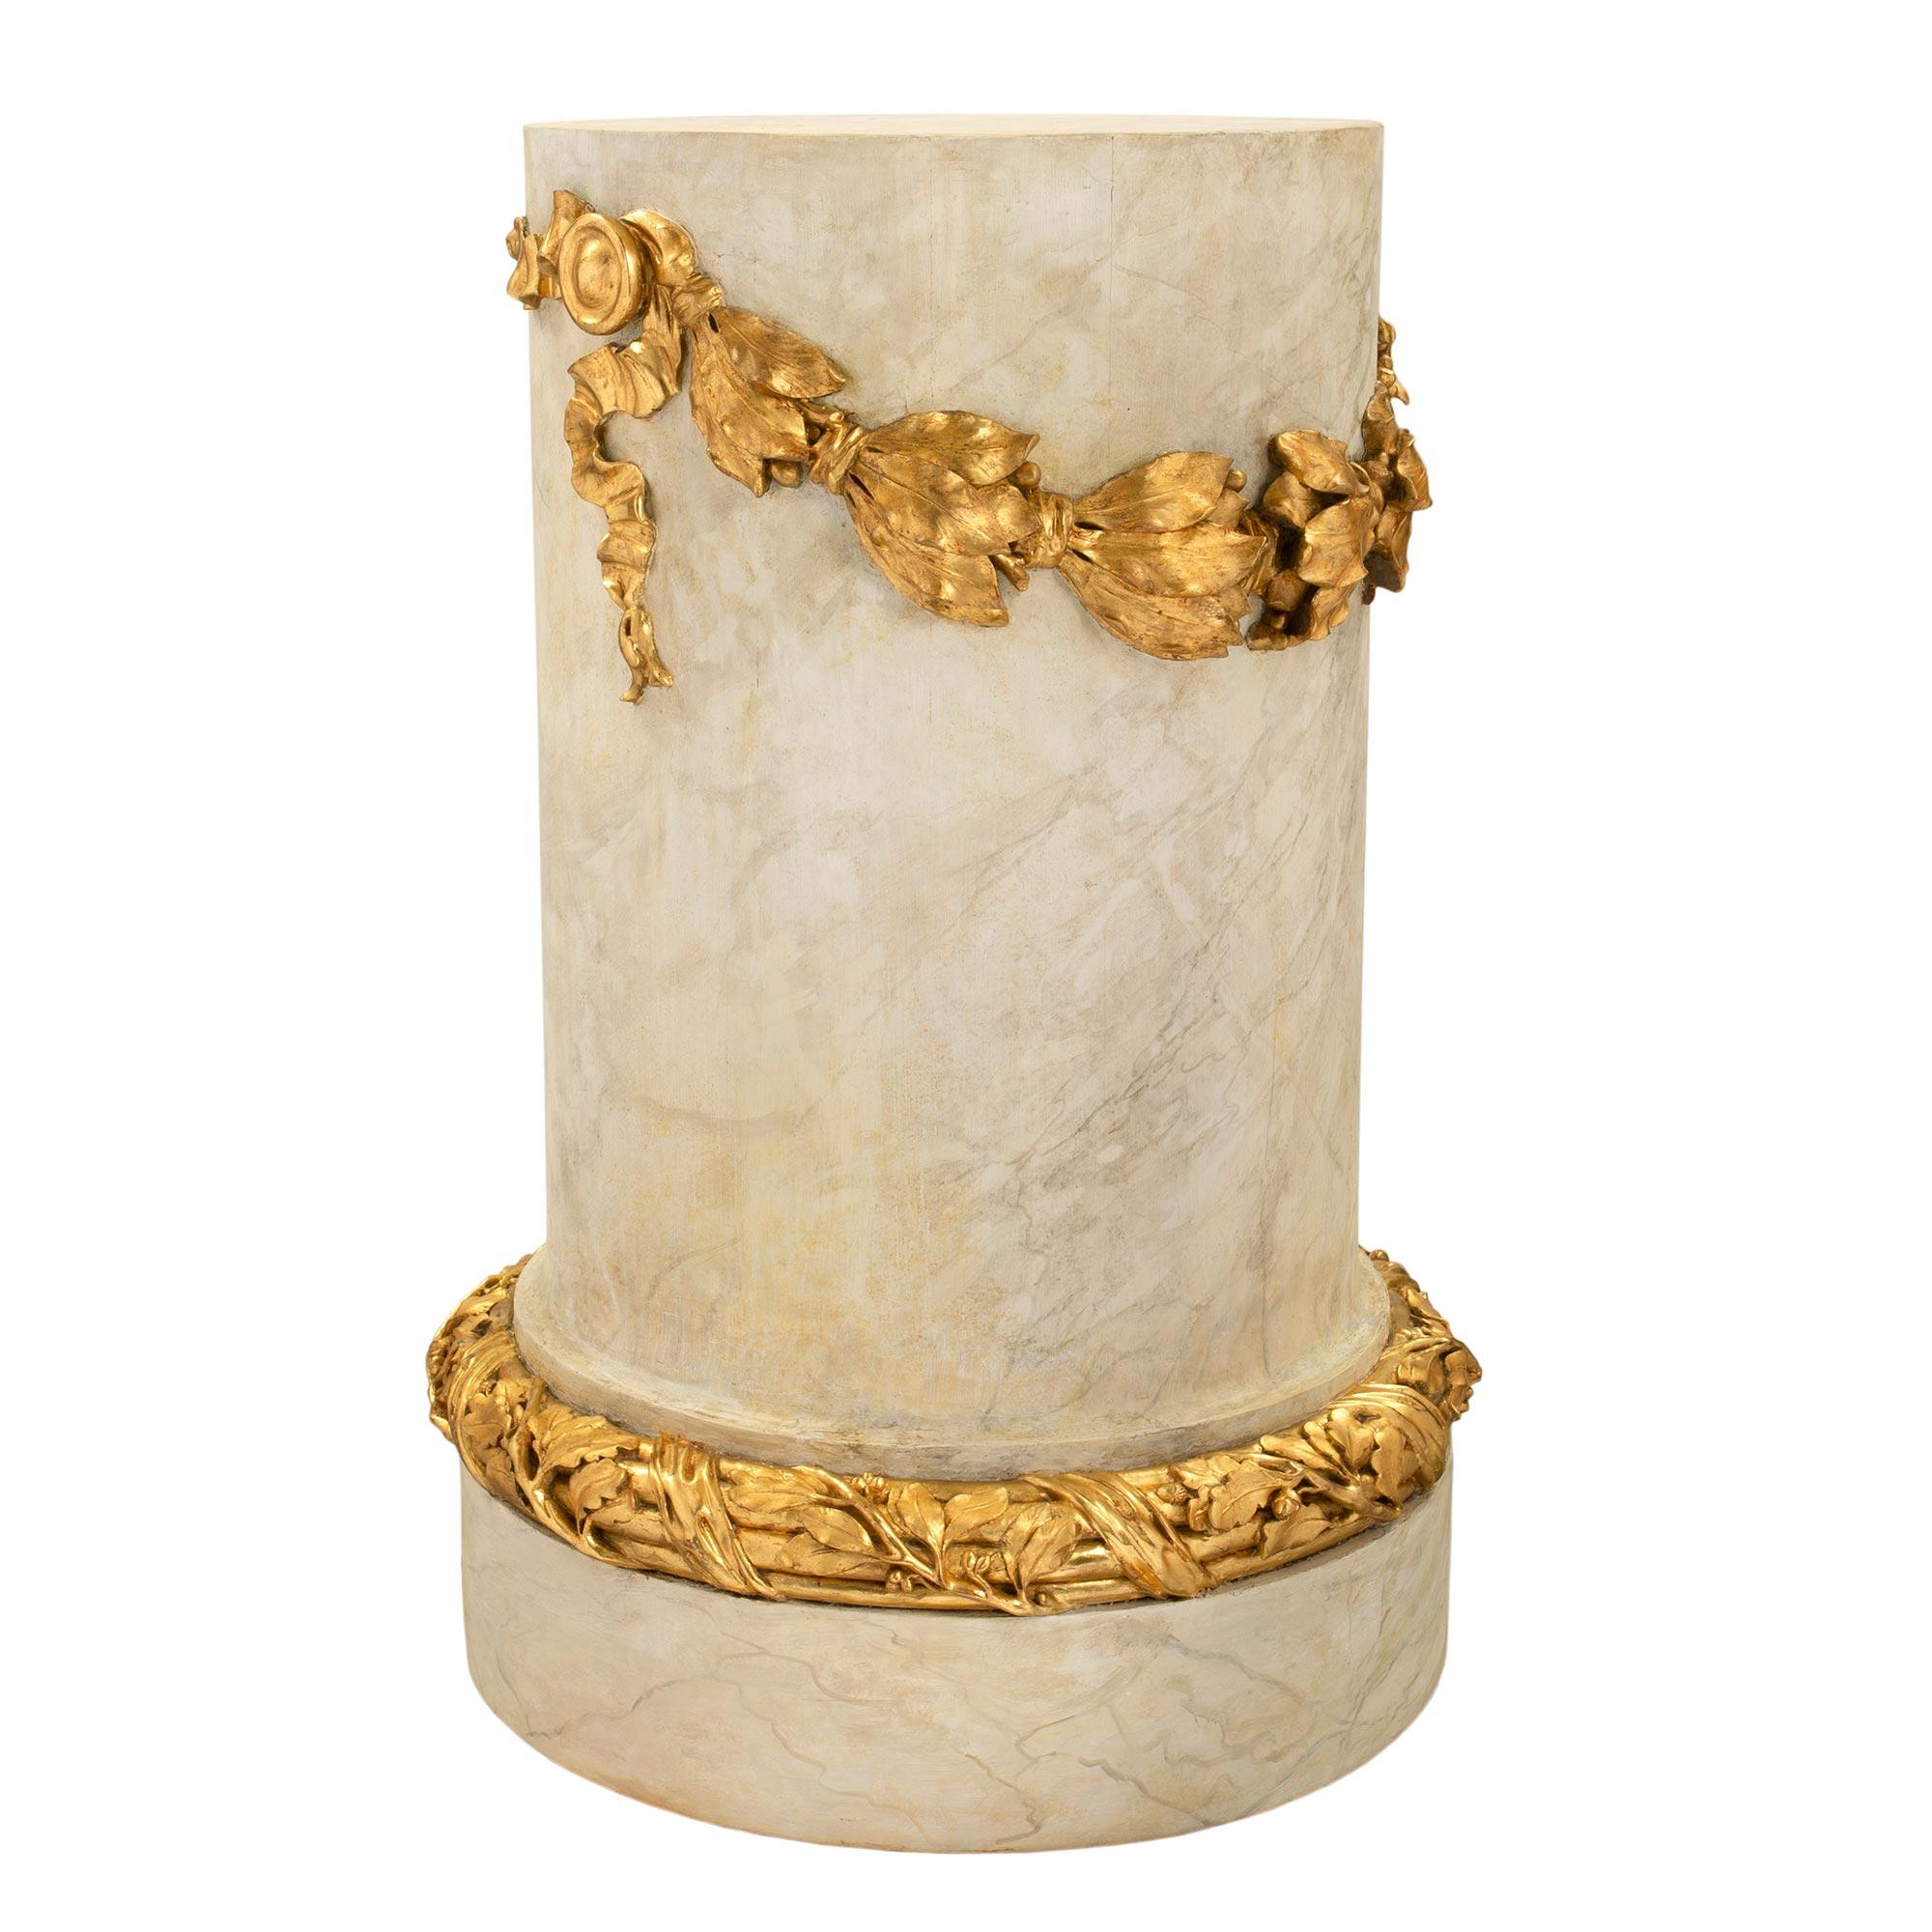 French 18th Century Louis XVI Period Pedestal Column In Good Condition For Sale In West Palm Beach, FL